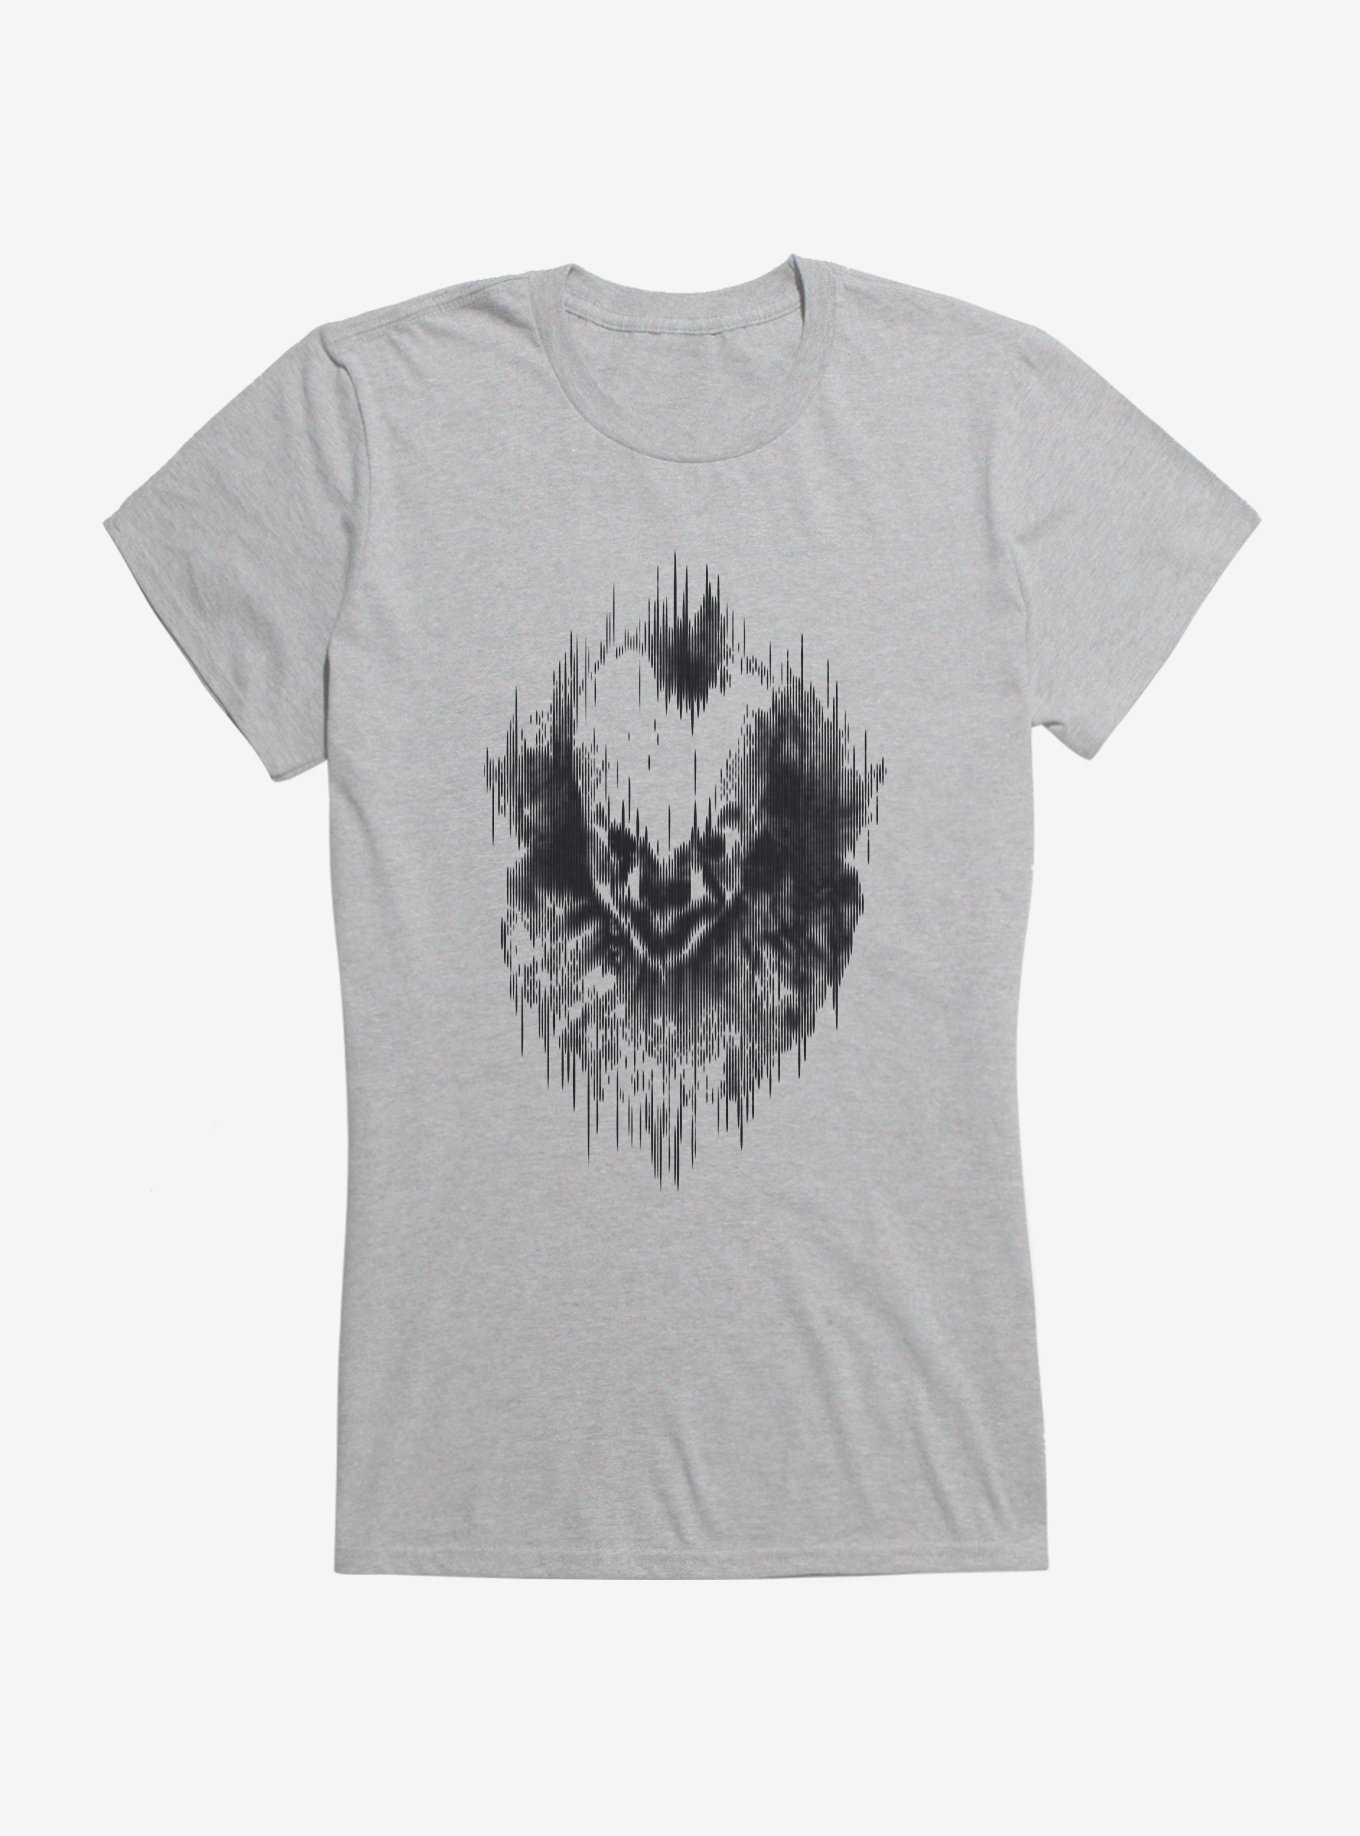 IT Chapter Two Pennywise Static Outline Girls T-Shirt, HEATHER, hi-res